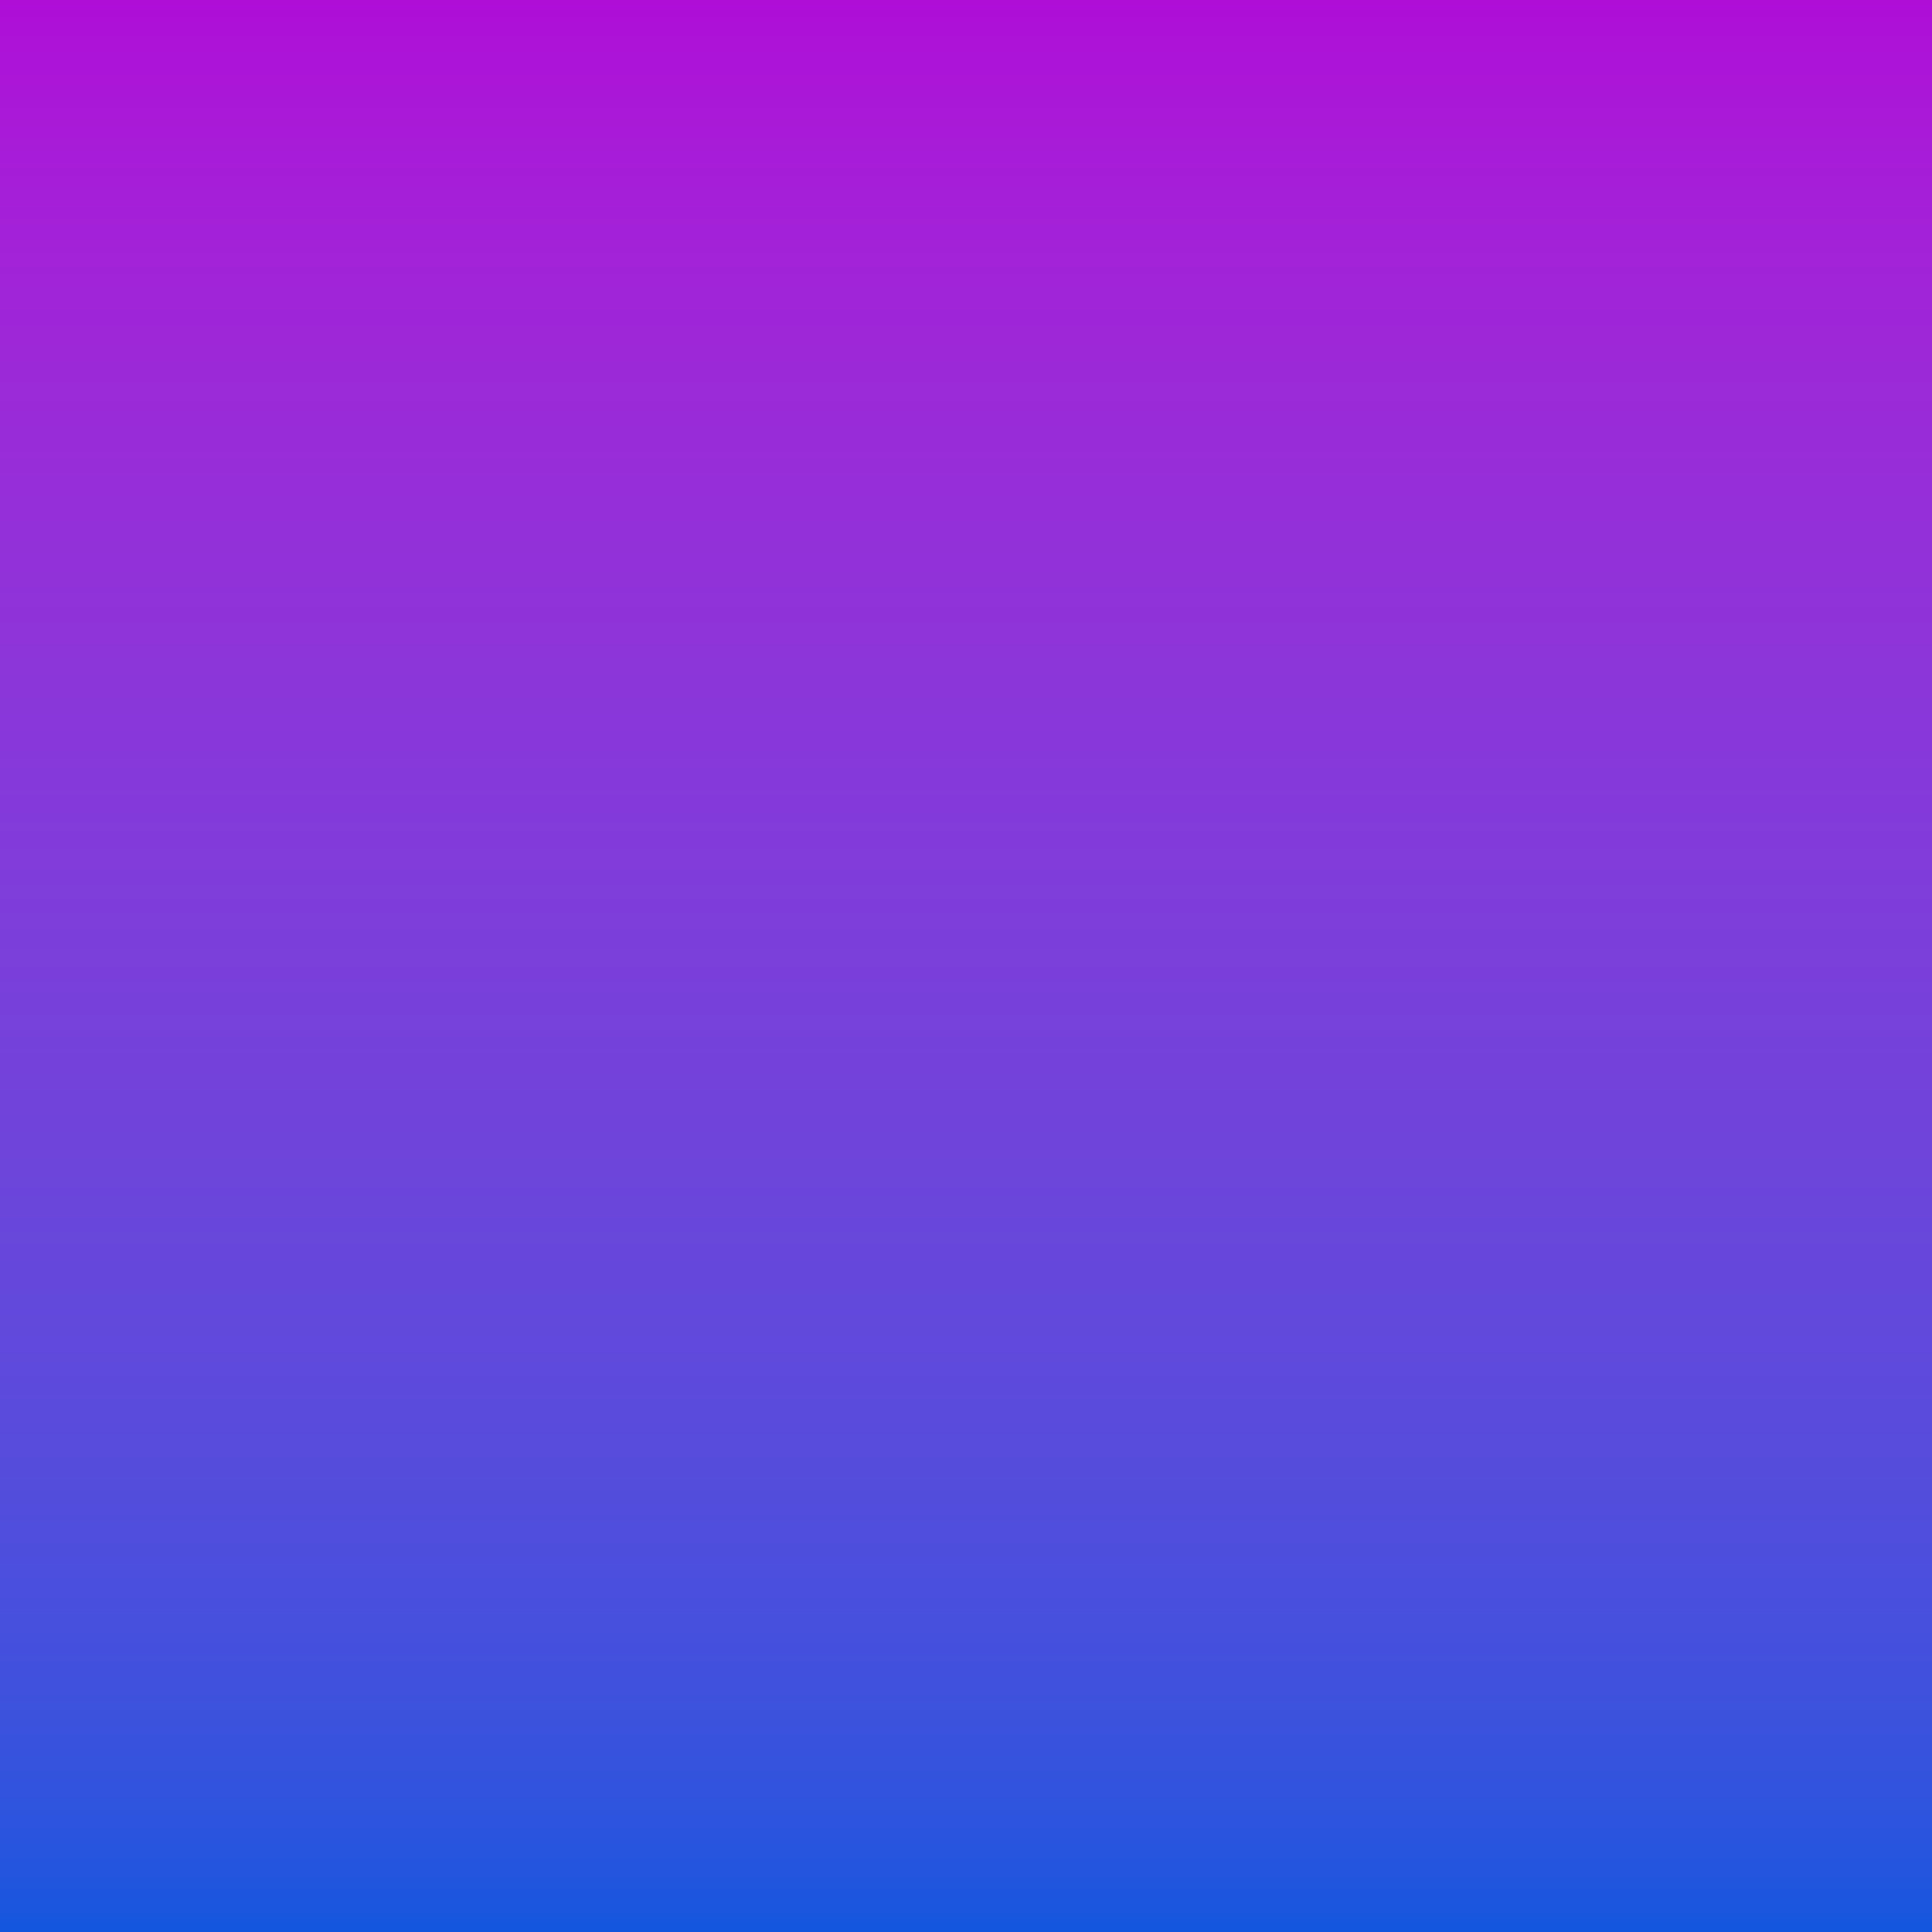 A gradient type background.